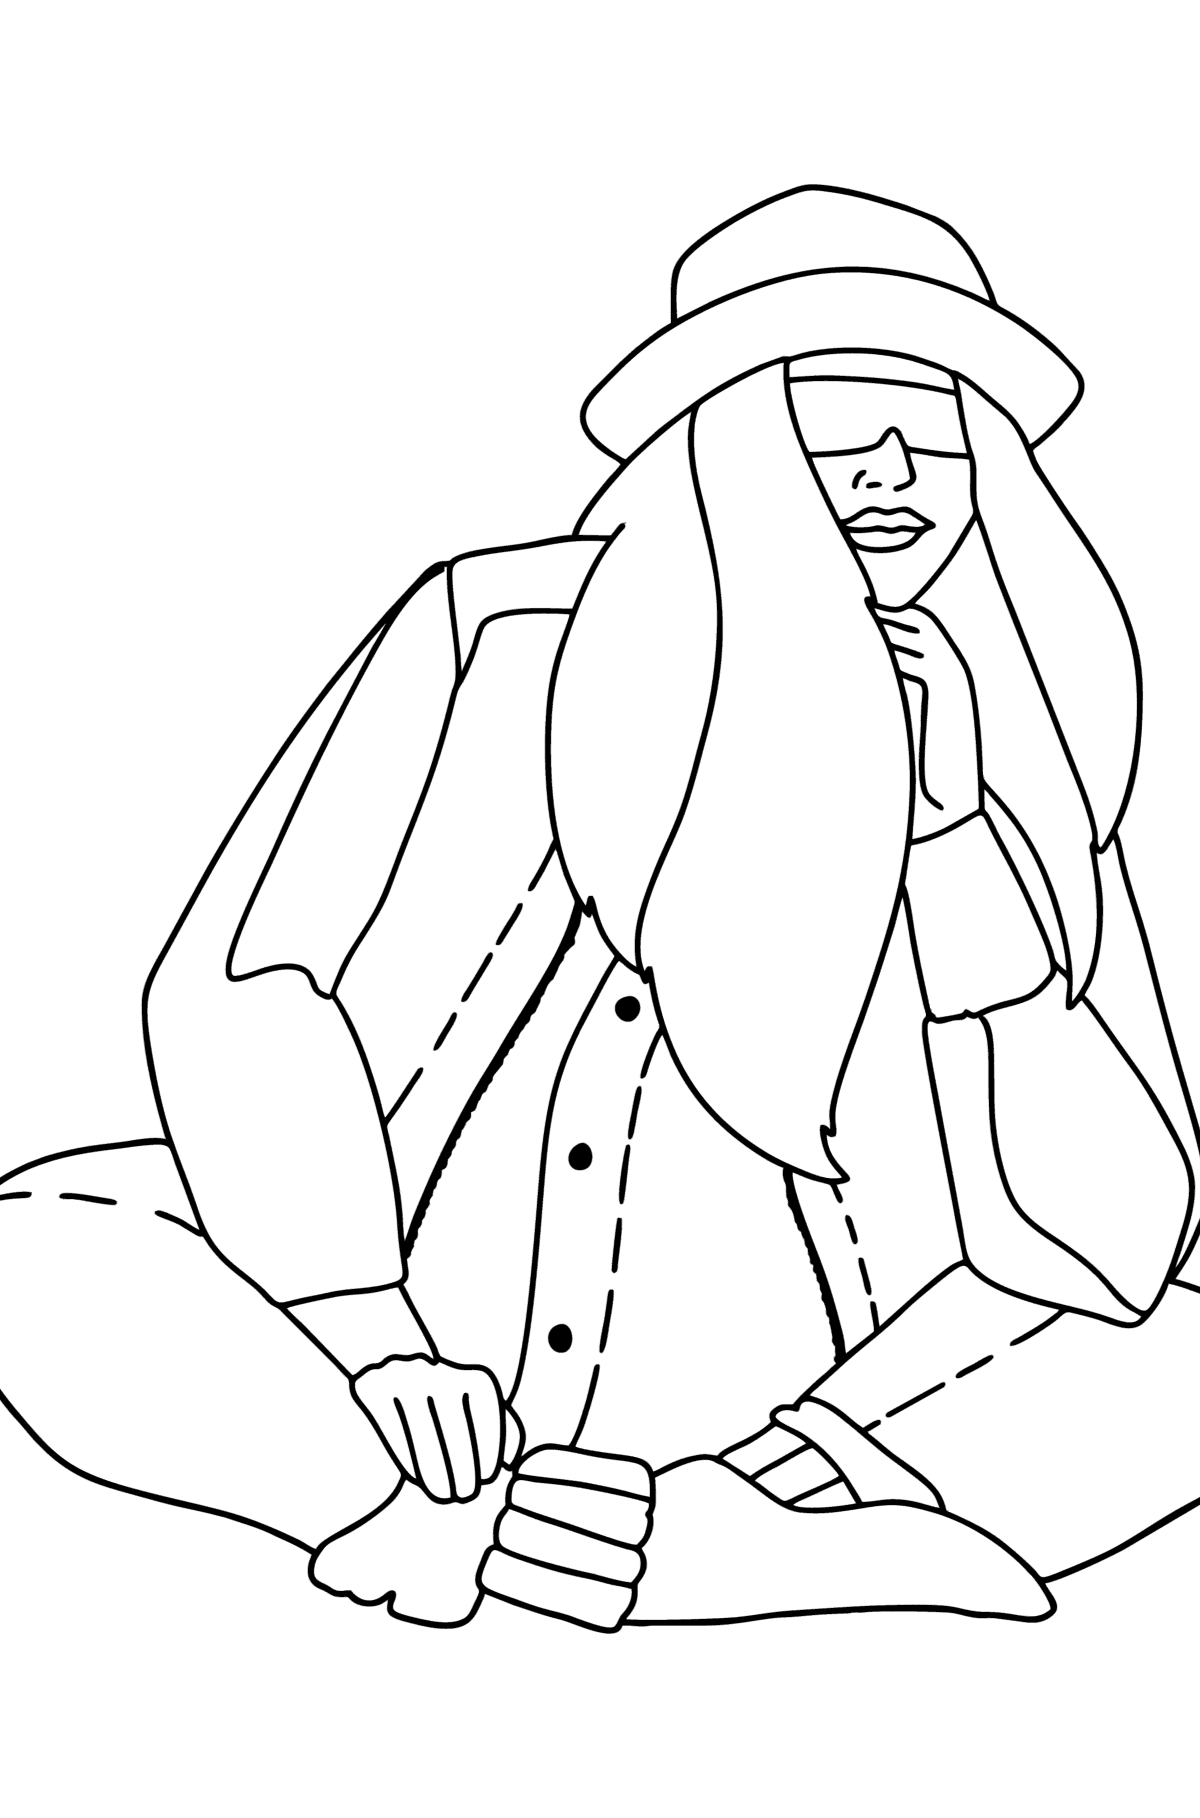 Hipster blond сoloring page - Coloring Pages for Kids